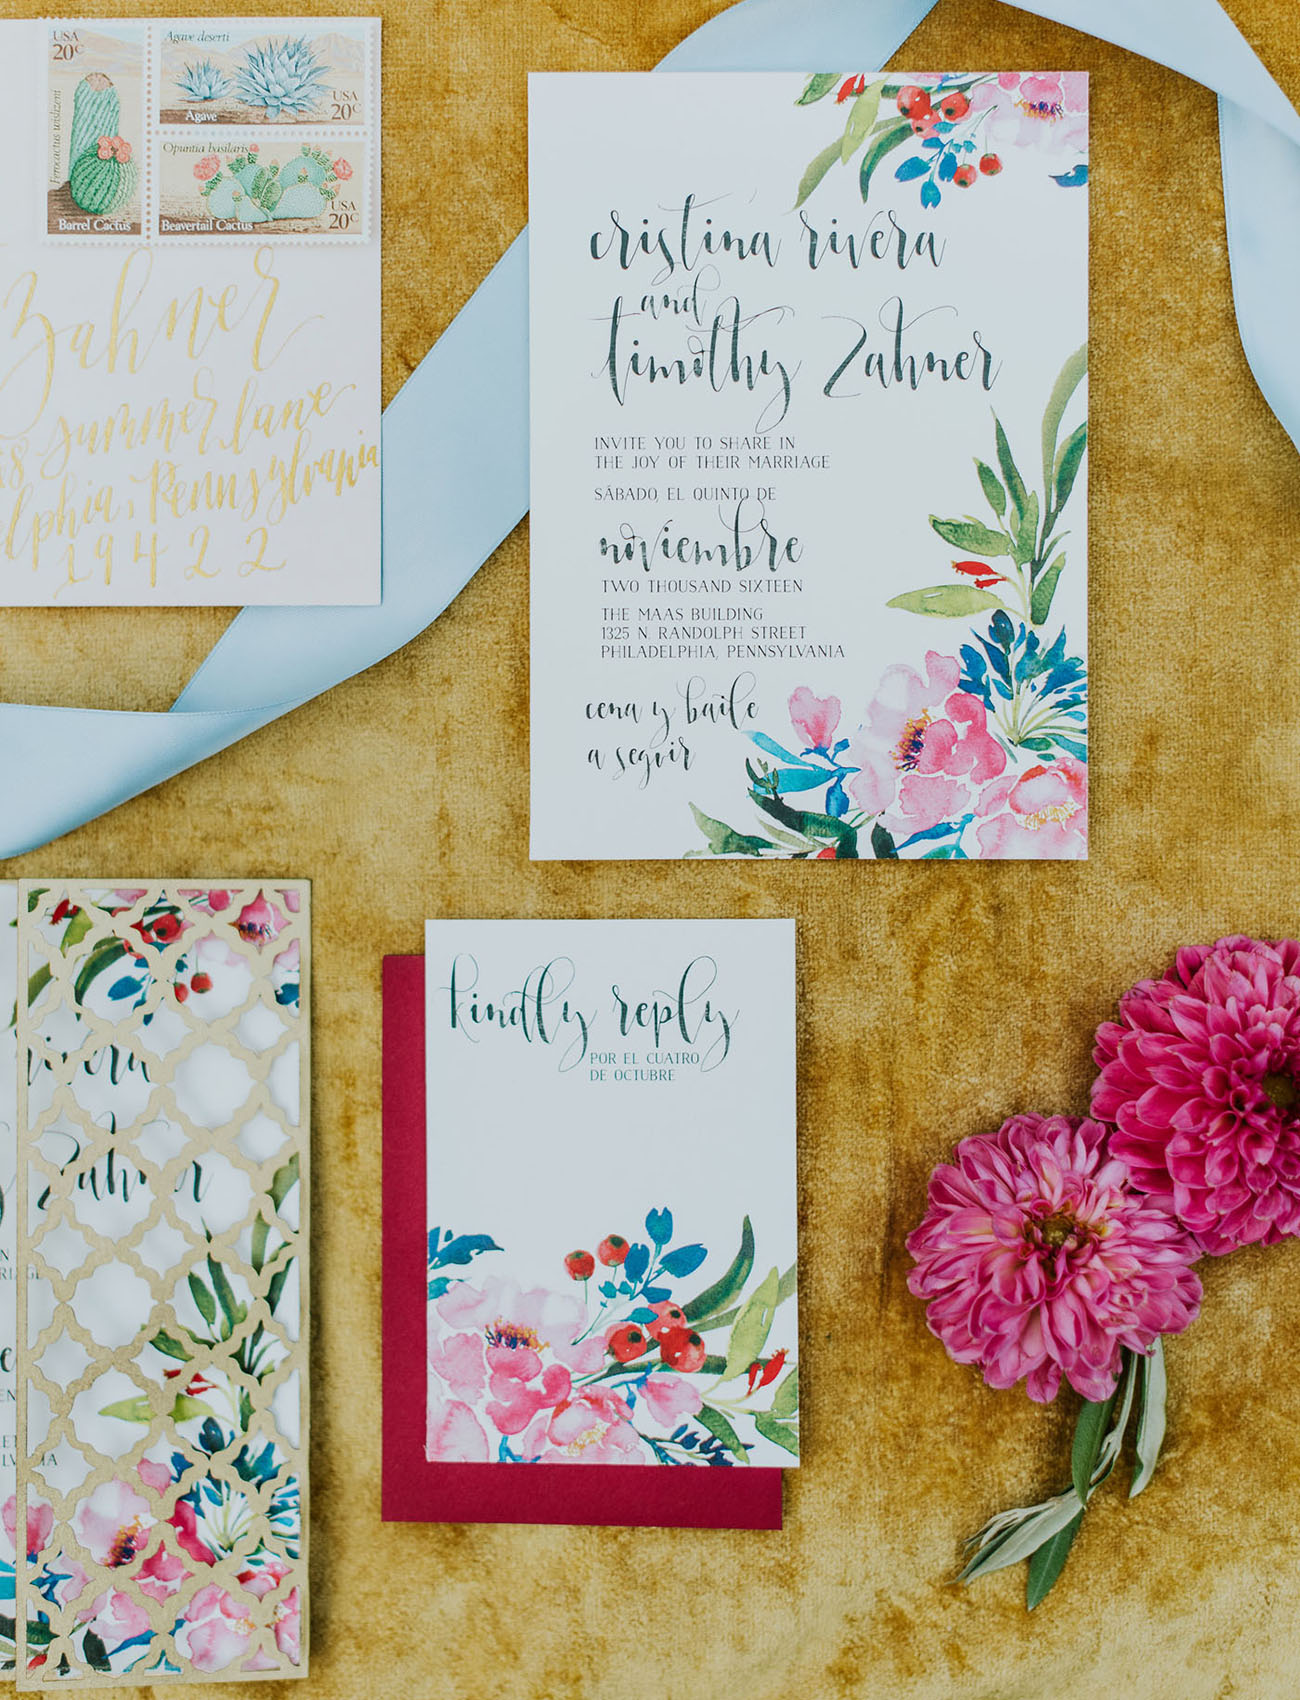 The wedding invitation suite was colorful and vibrant, so cool